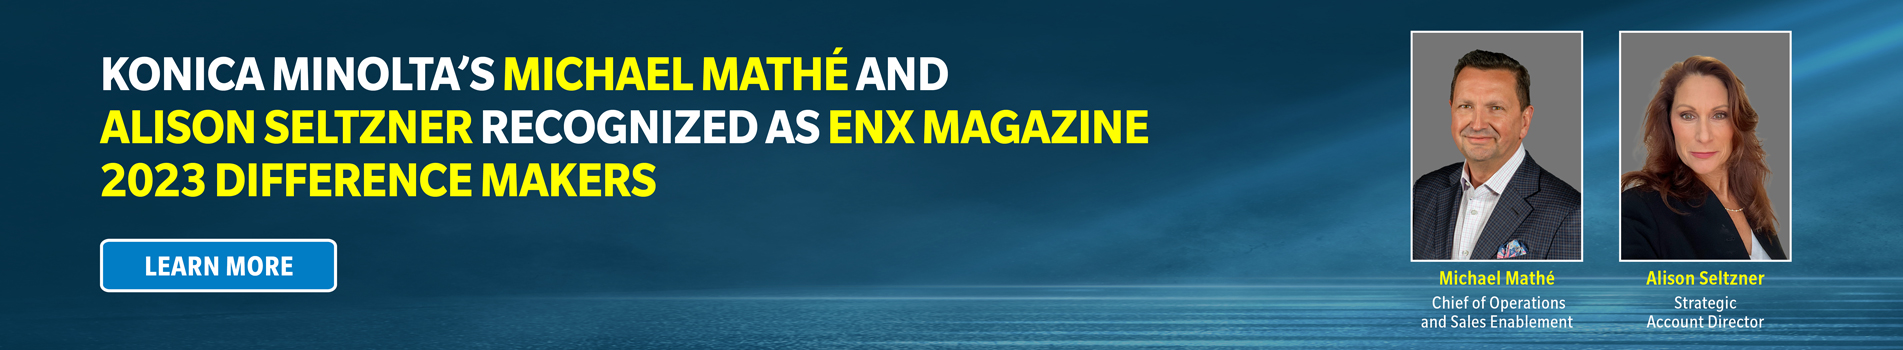 Konica Minolta’s Michael Mathé and Alison Seltzner Recognized as ENX Magazine 2023 Difference Makers